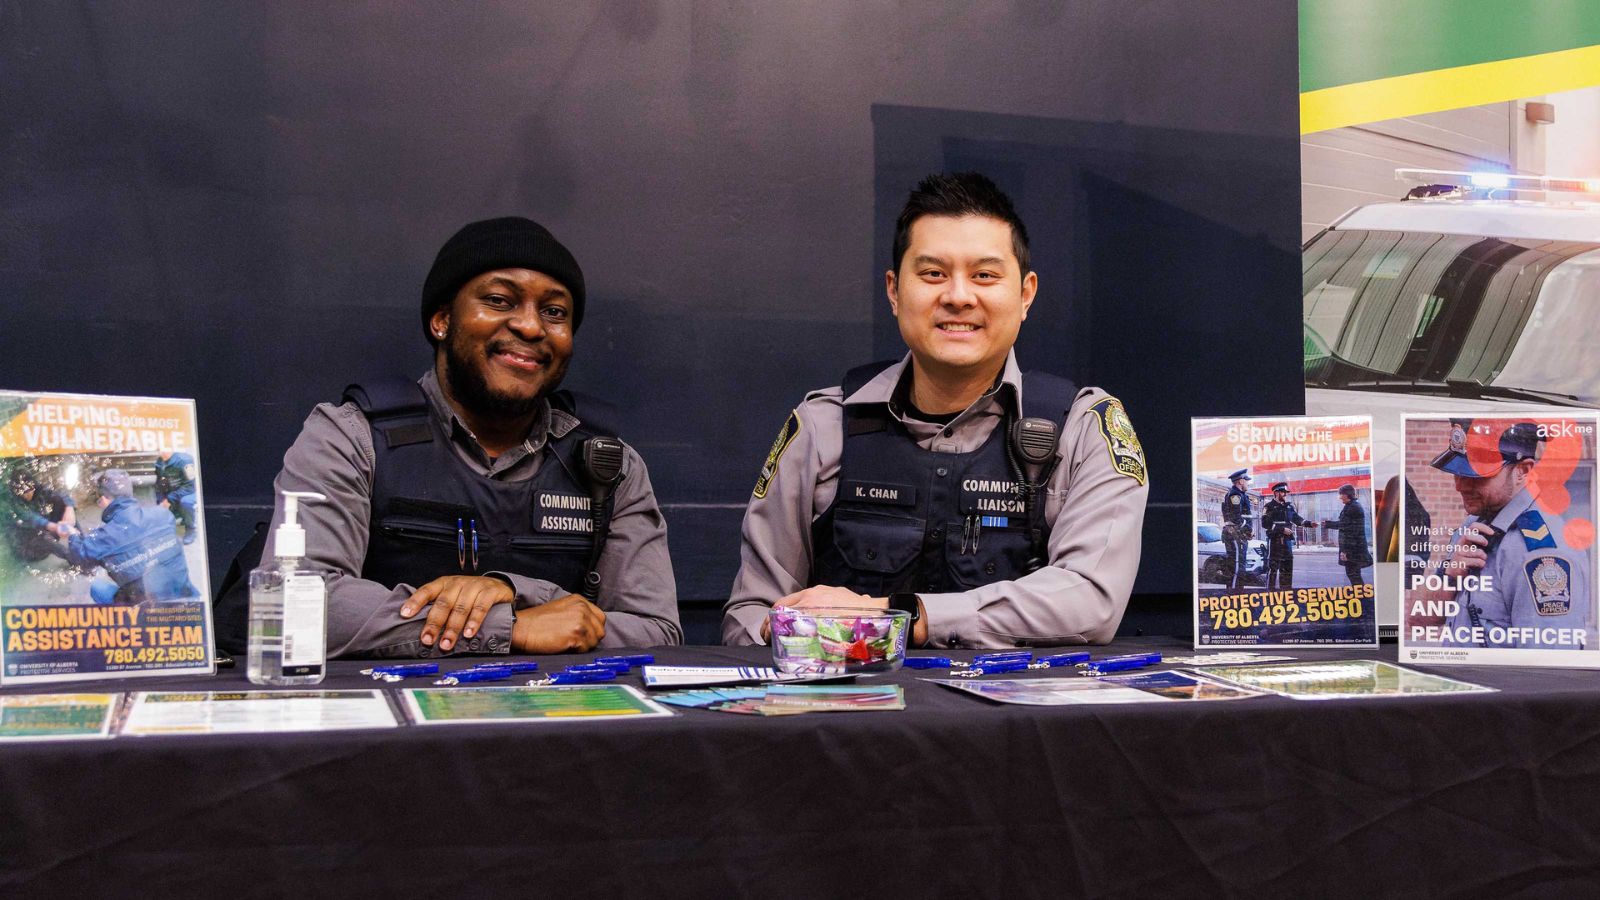 Bryan Mwaka, Navigator with the Community Assistance Team, and Ken Chan, Community Liaison Officer, at the Winter Warm-Up: Winter orientation event 2024 in Dinwoodie Lounge, Students' Union Building, North Campus on January 16, 2024.